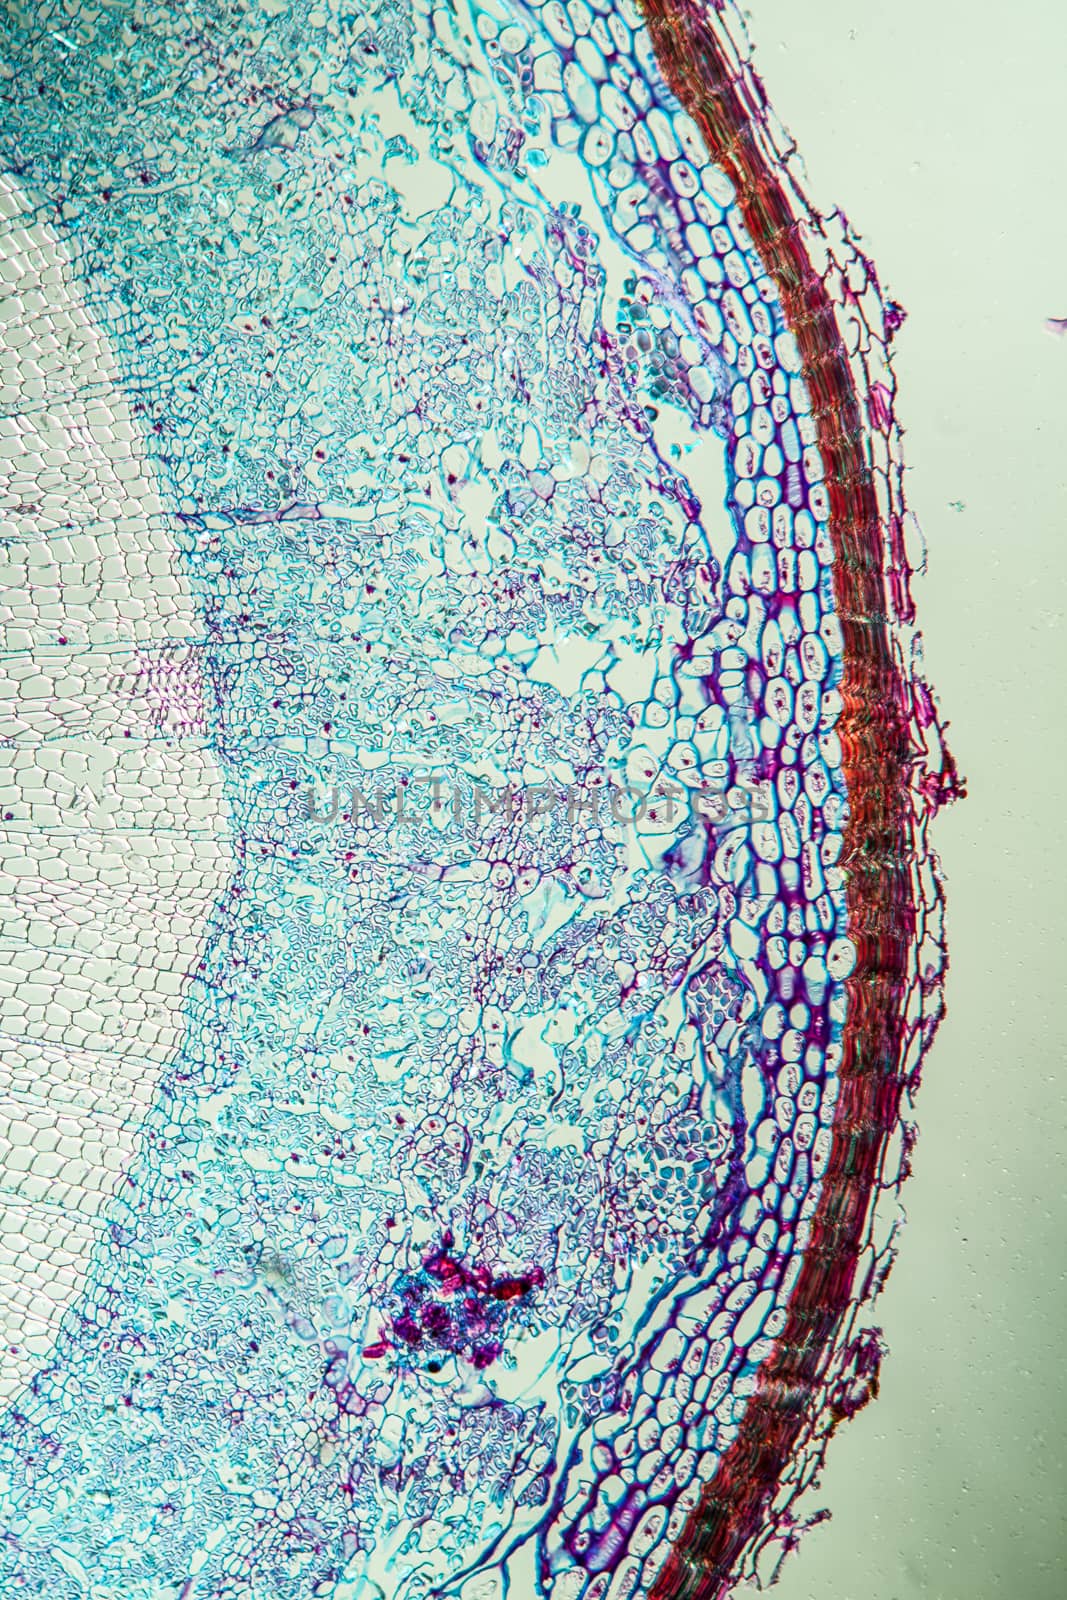 Silk bast branch in cross section 100x by Dr-Lange